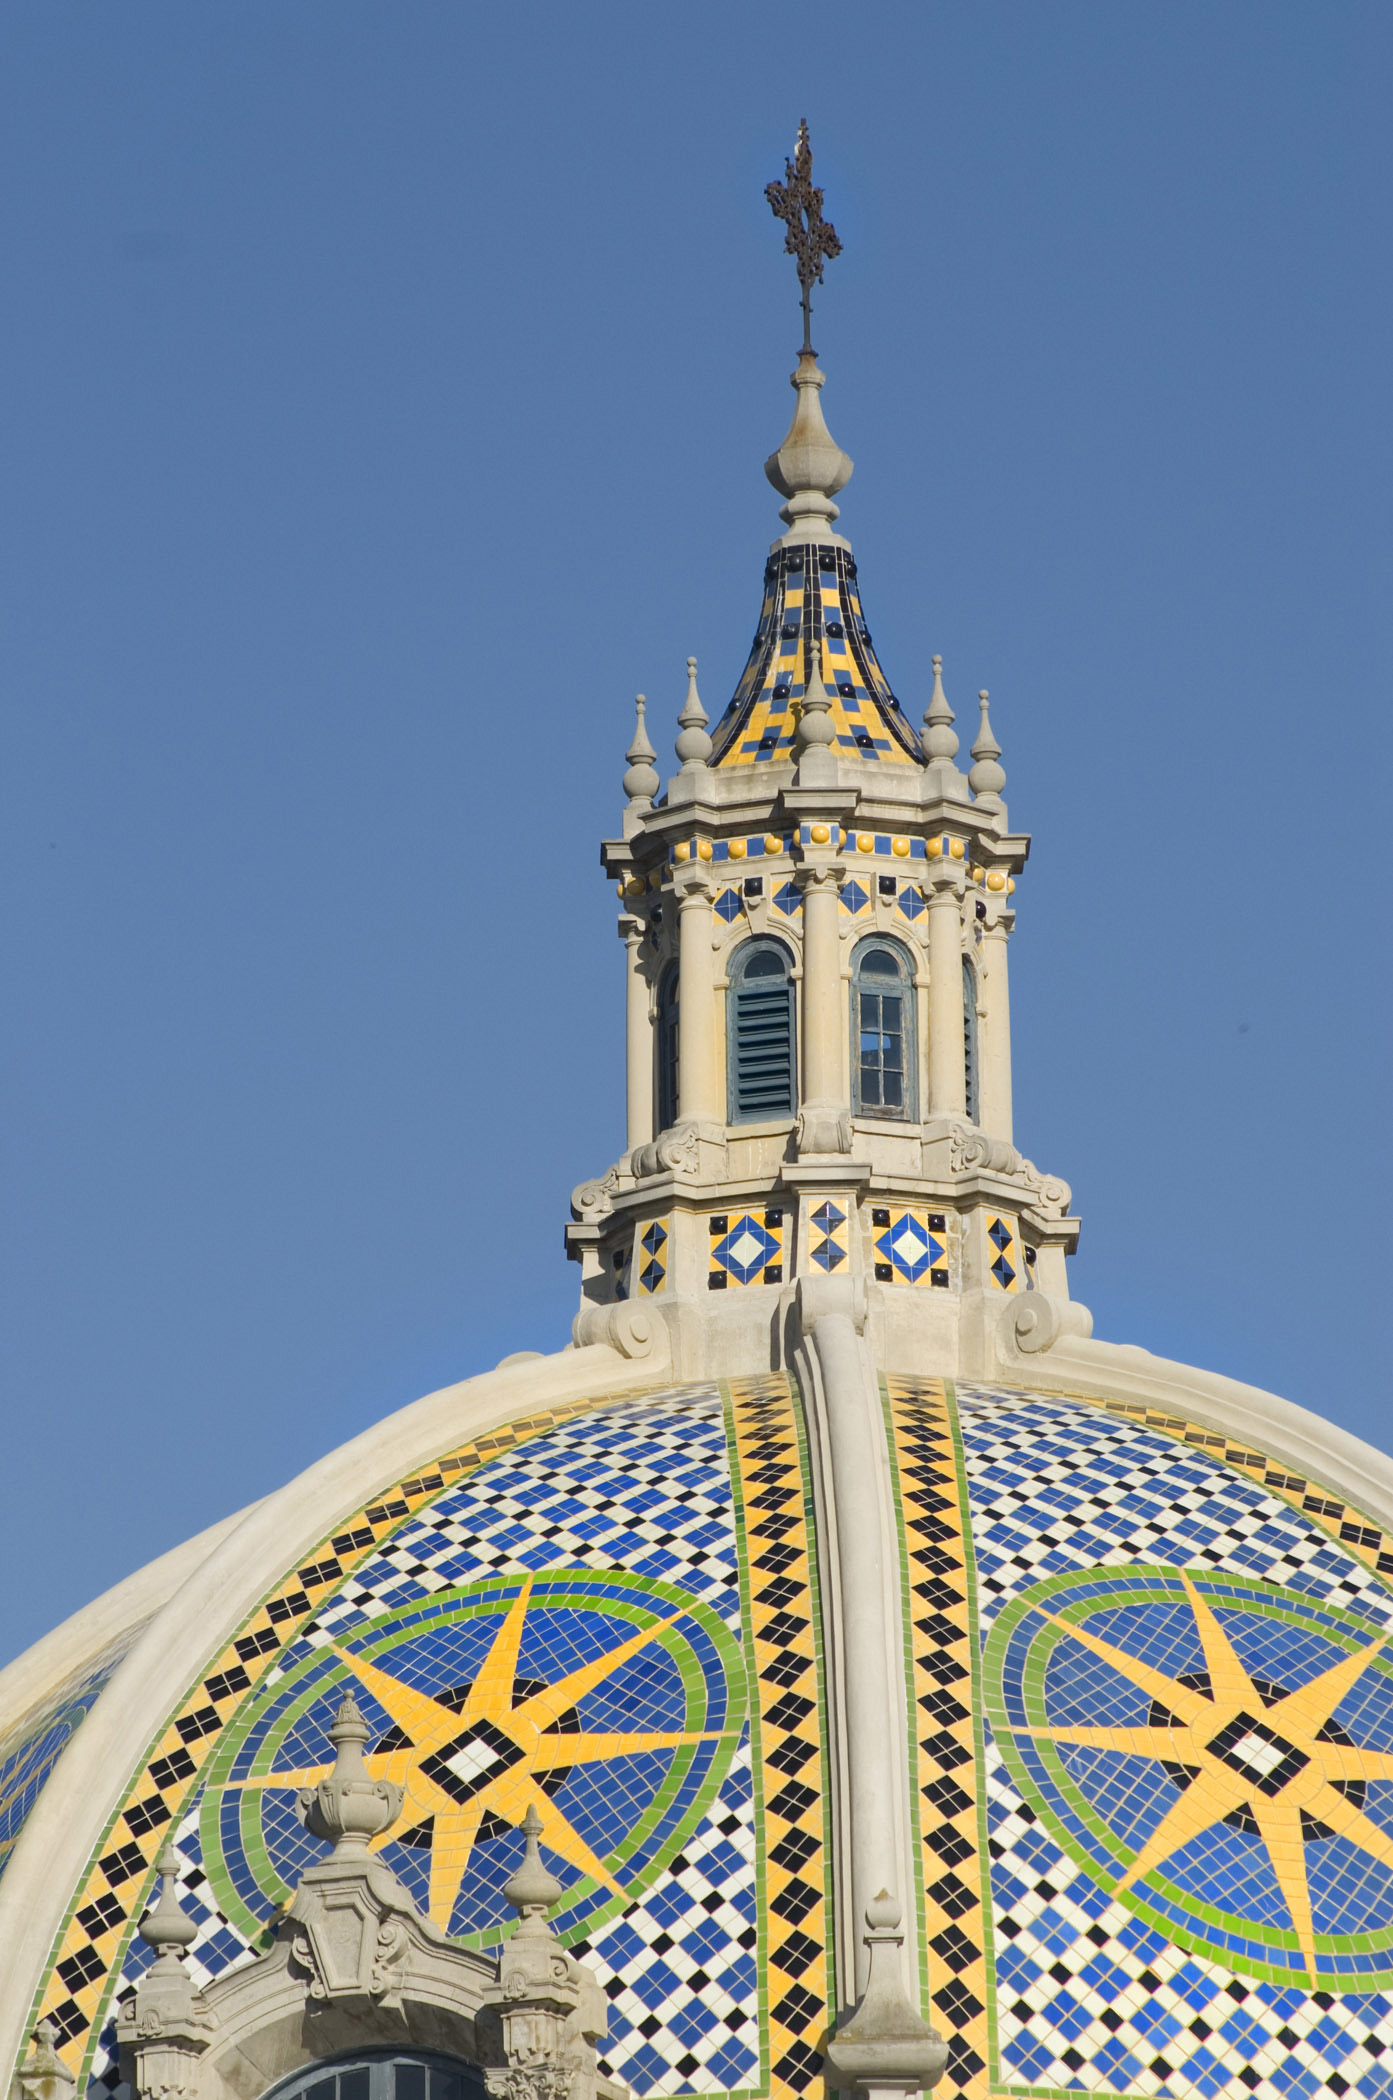 Close up Artistic California Dome with Mosaic Tiles at Balboa Park San Diego. Isolated on Blue Sky.